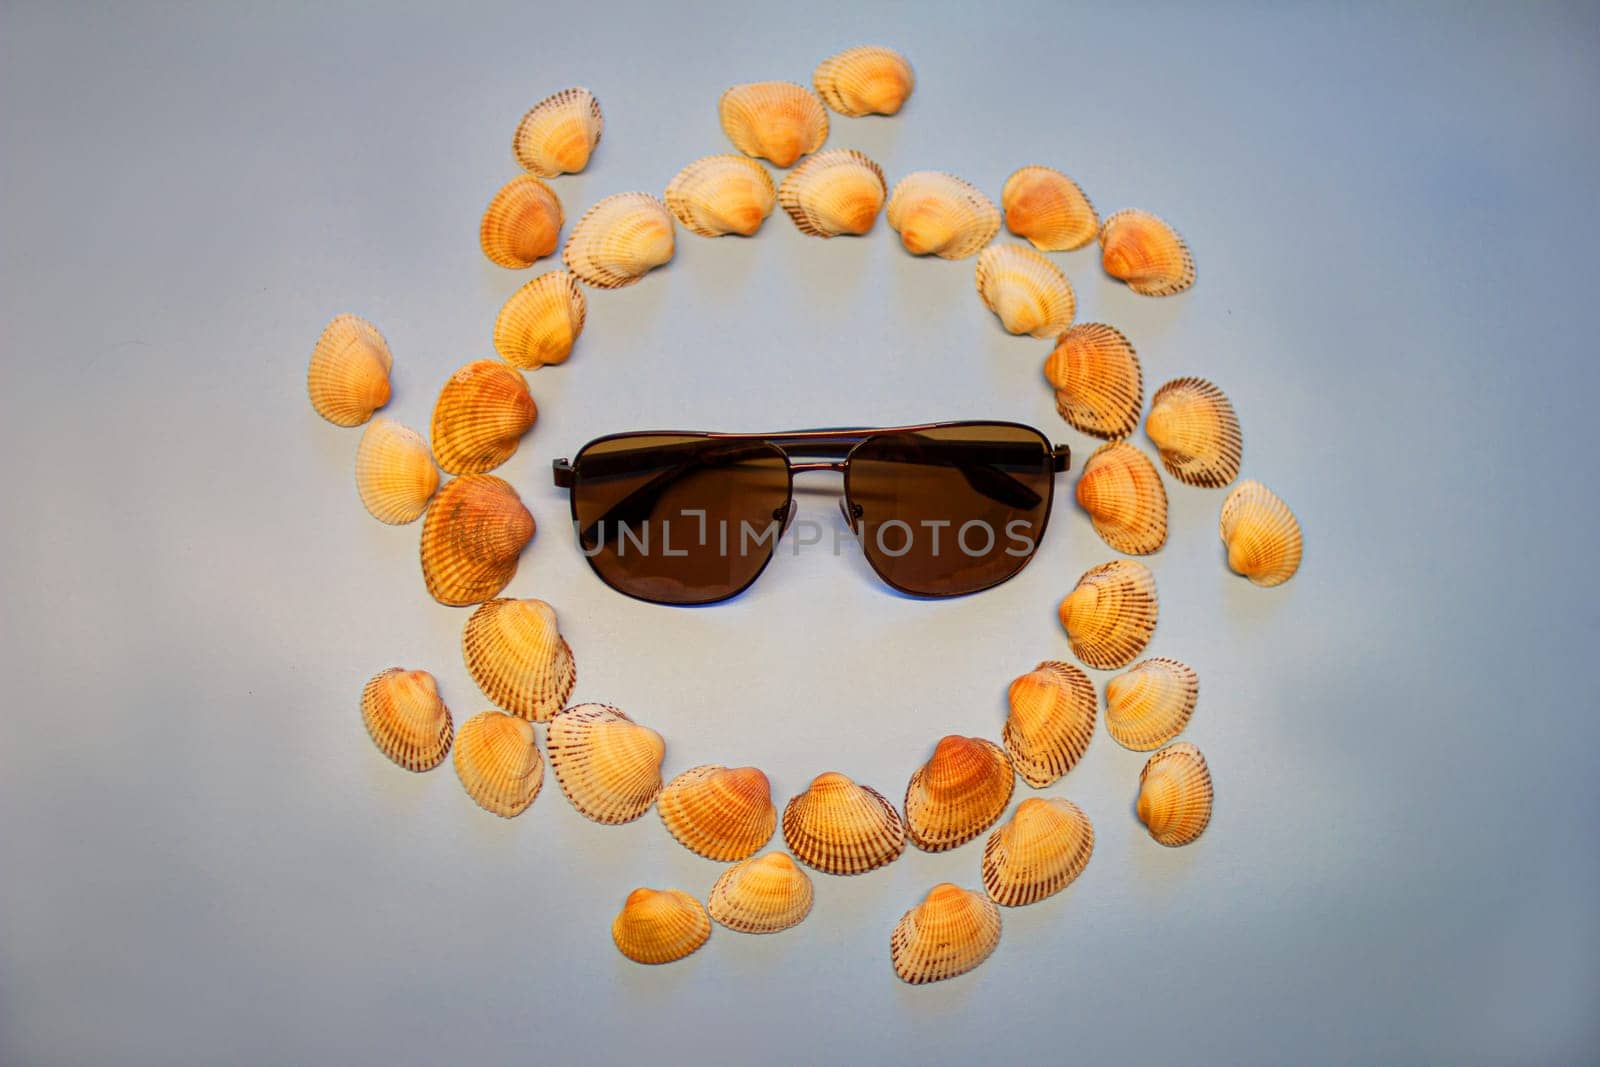 Sun of shells in sunglasses. High quality photo